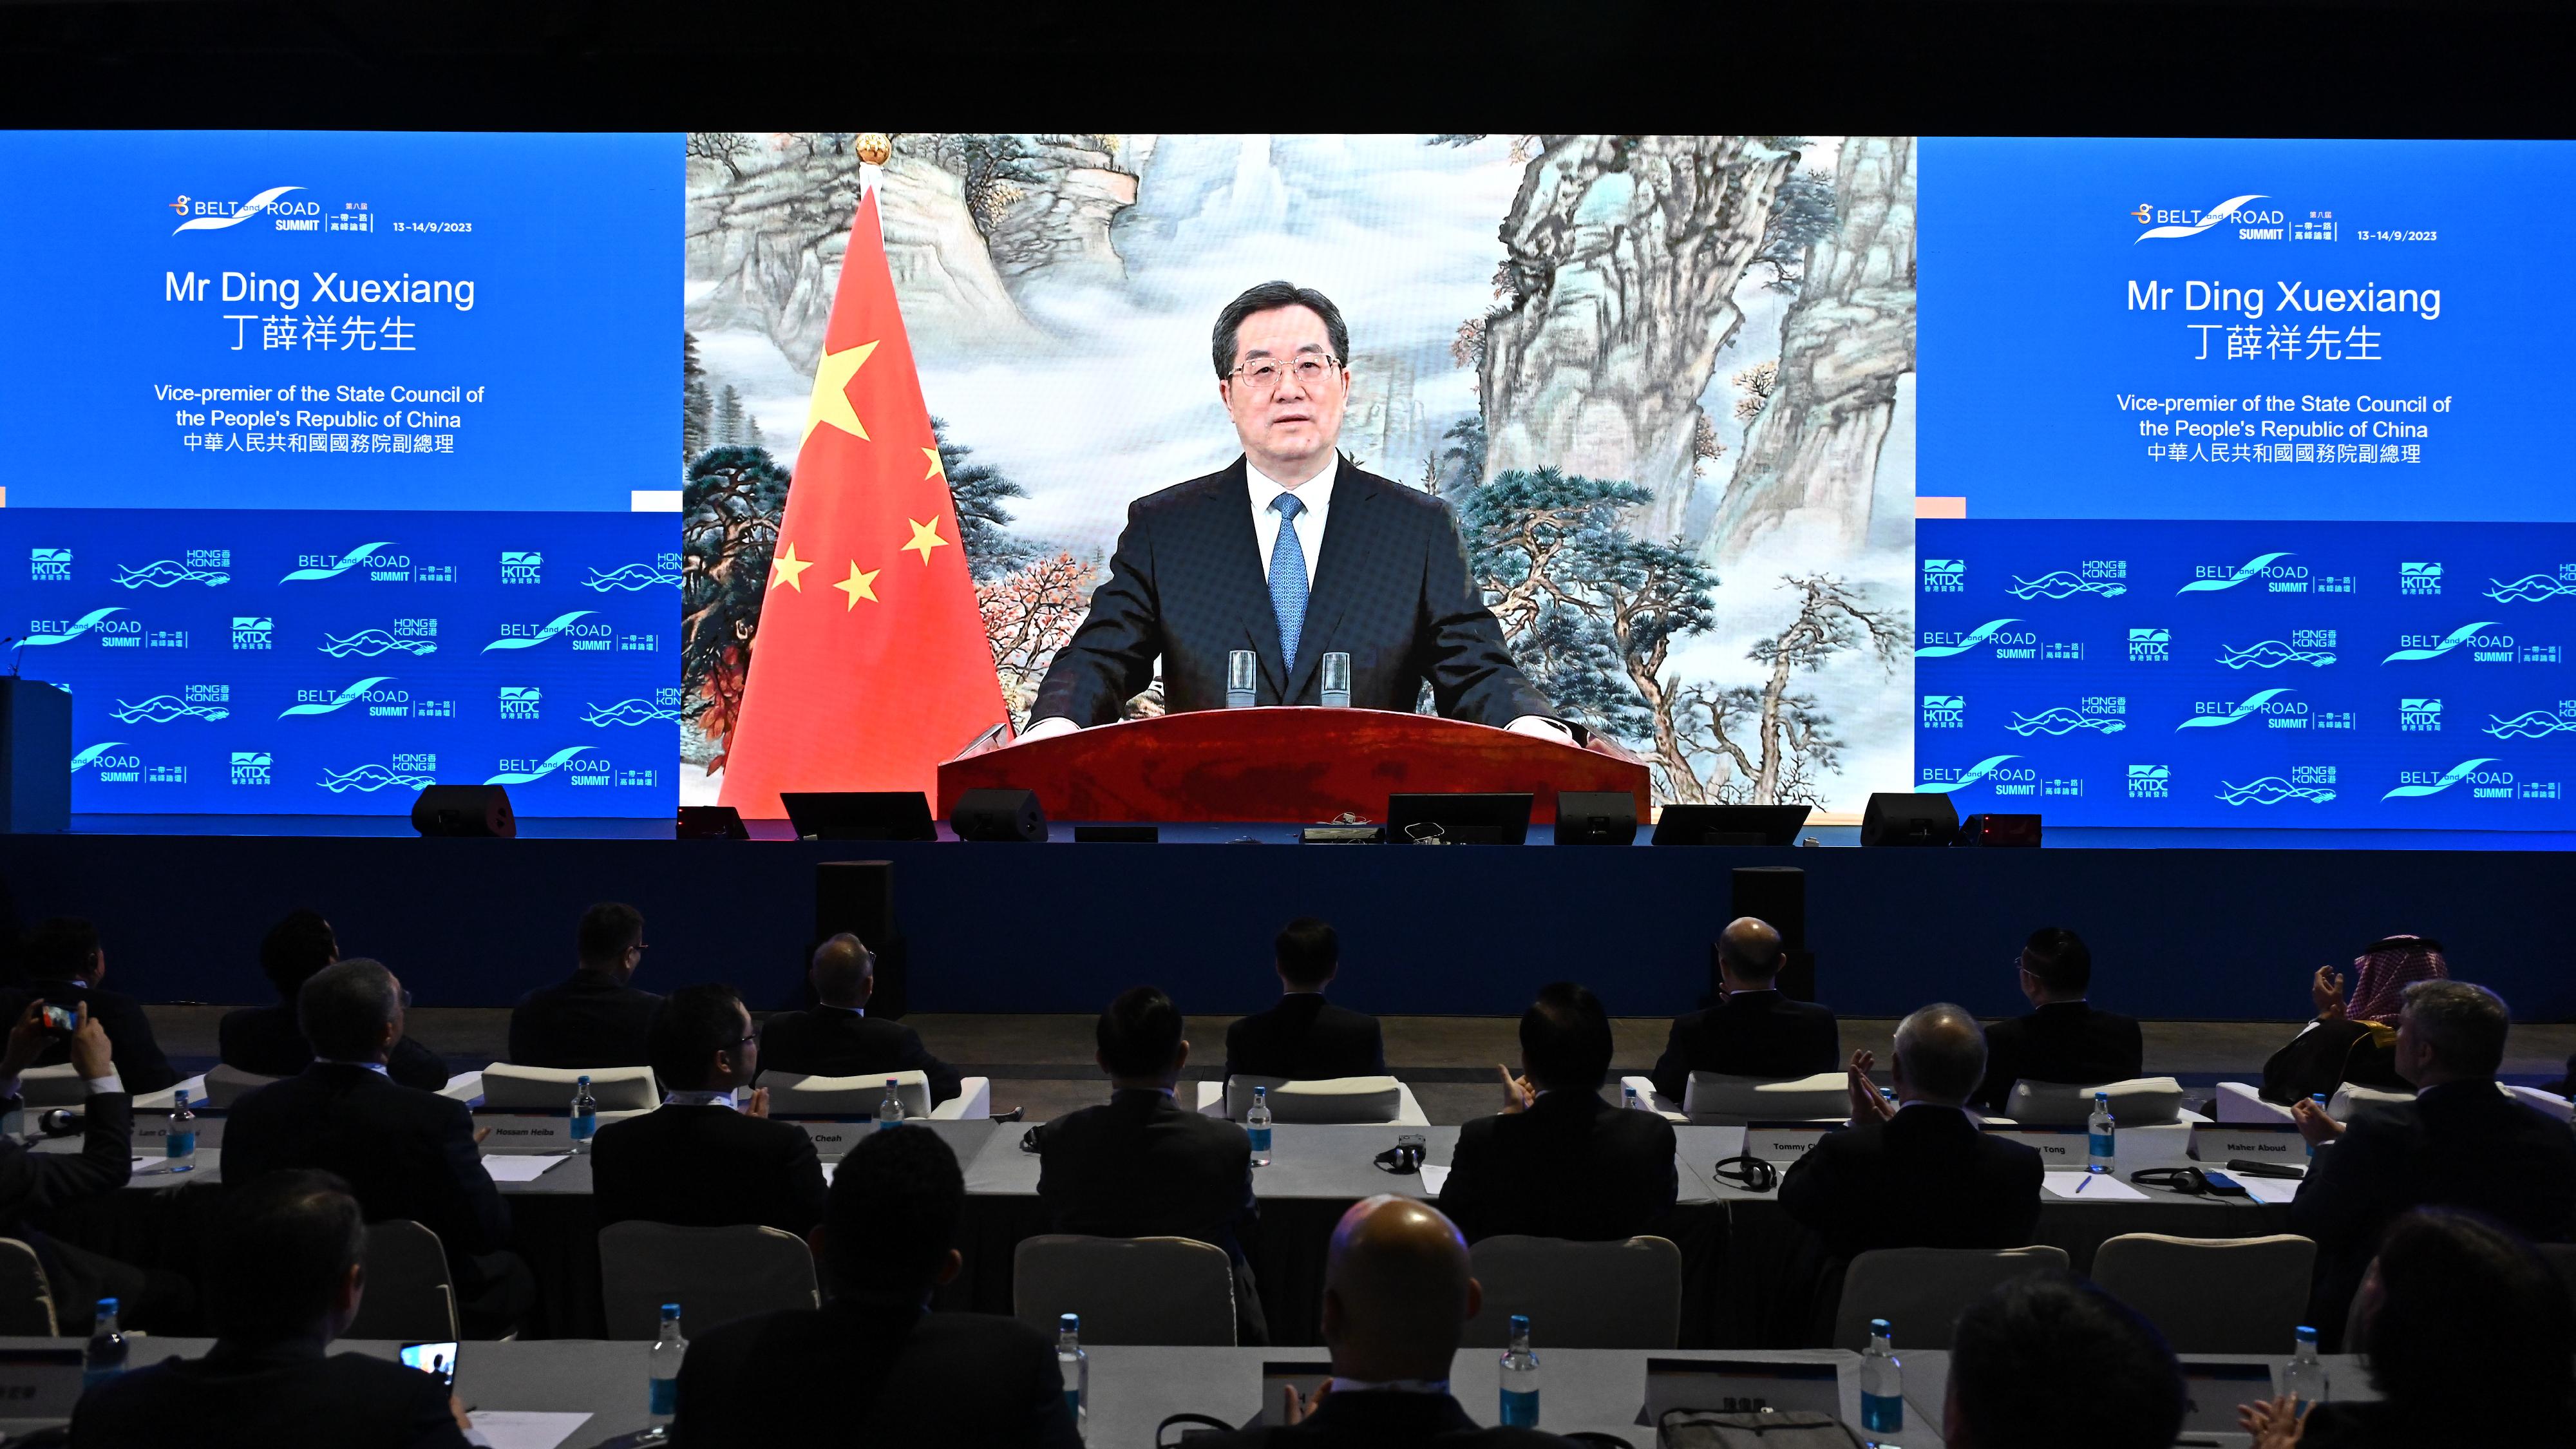 The eighth Belt and Road Summit opened today (September 13). Vice Premier of the State Council Mr Ding Xuexiang delivered a video keynote speech at the opening session this morning.